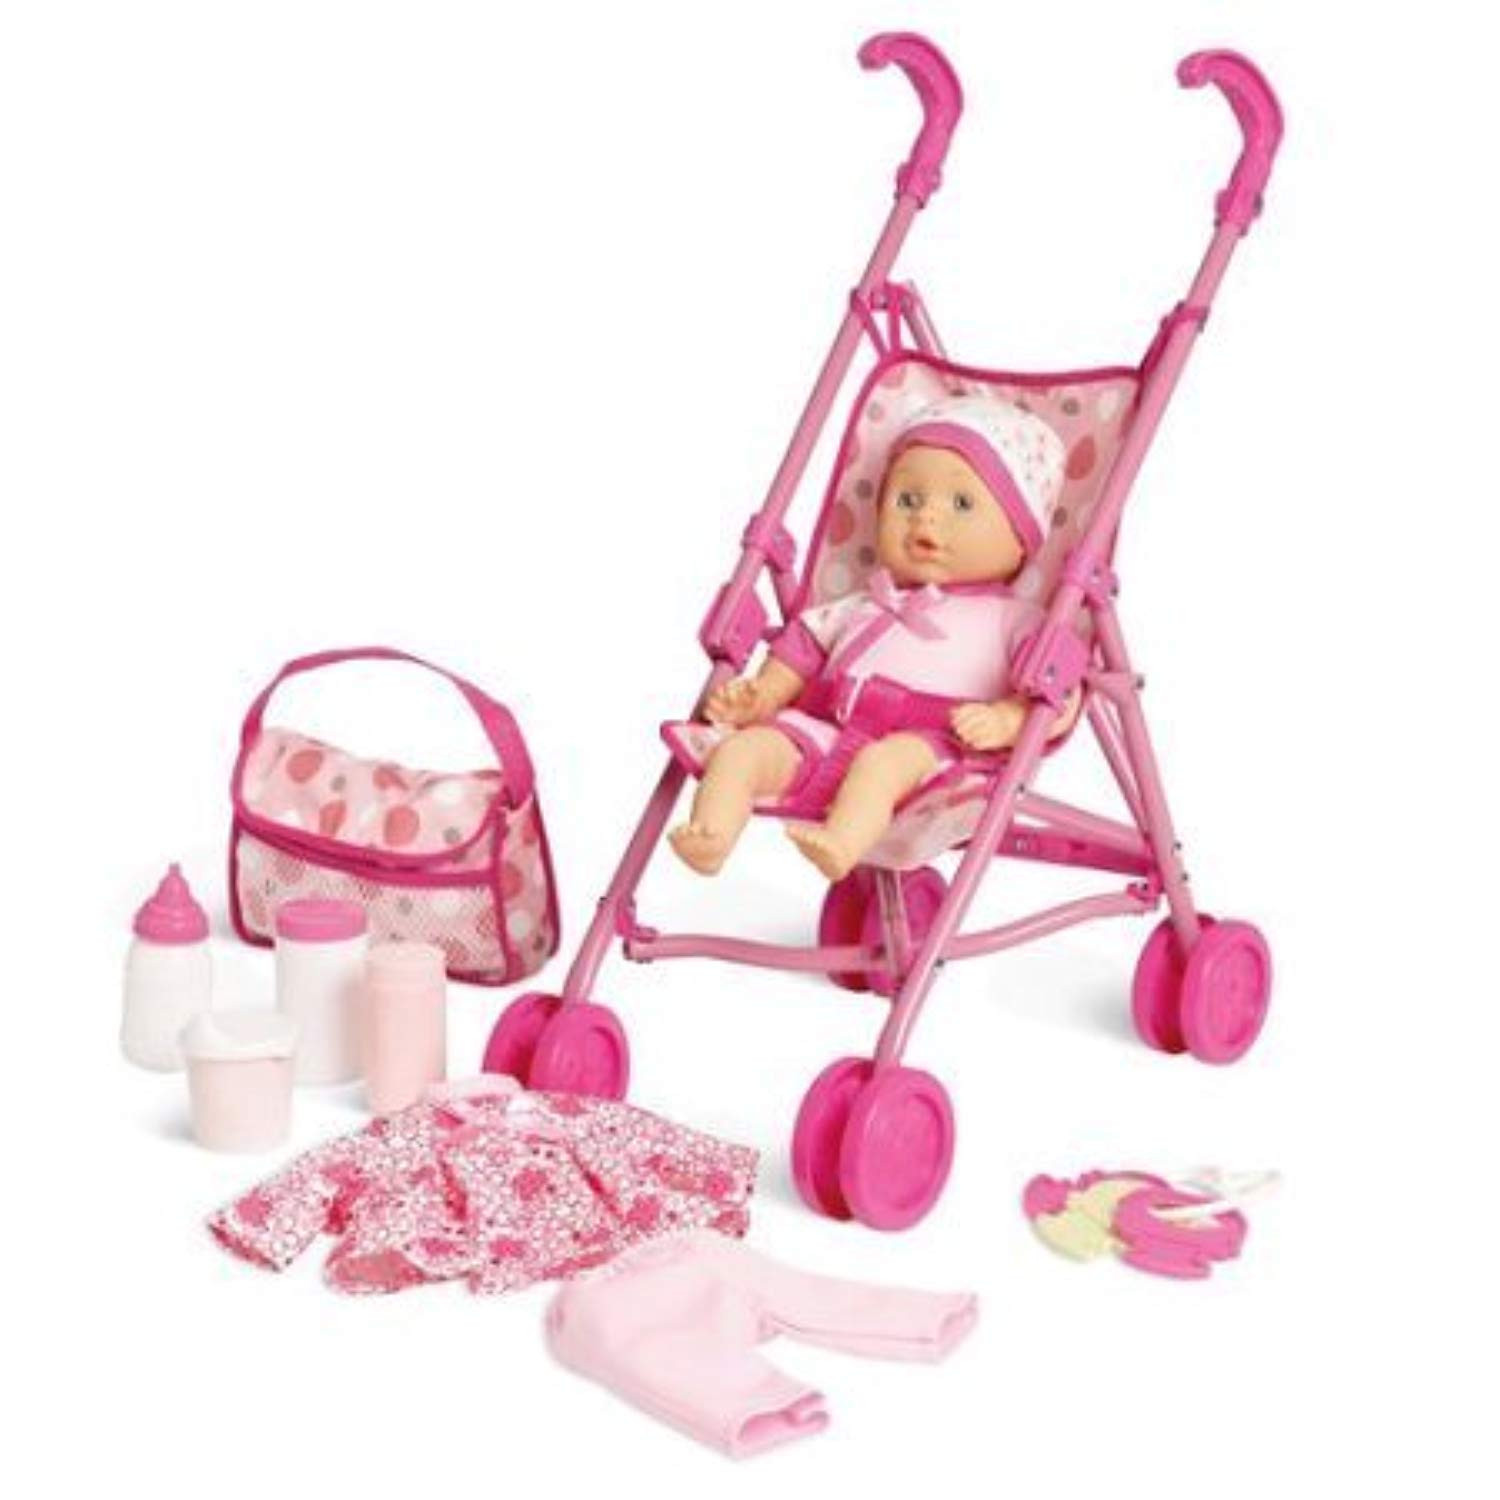 Baby Doll With Stroller Gift Set
 Pink Baby Doll Stroller Play Set with Additional Clothes